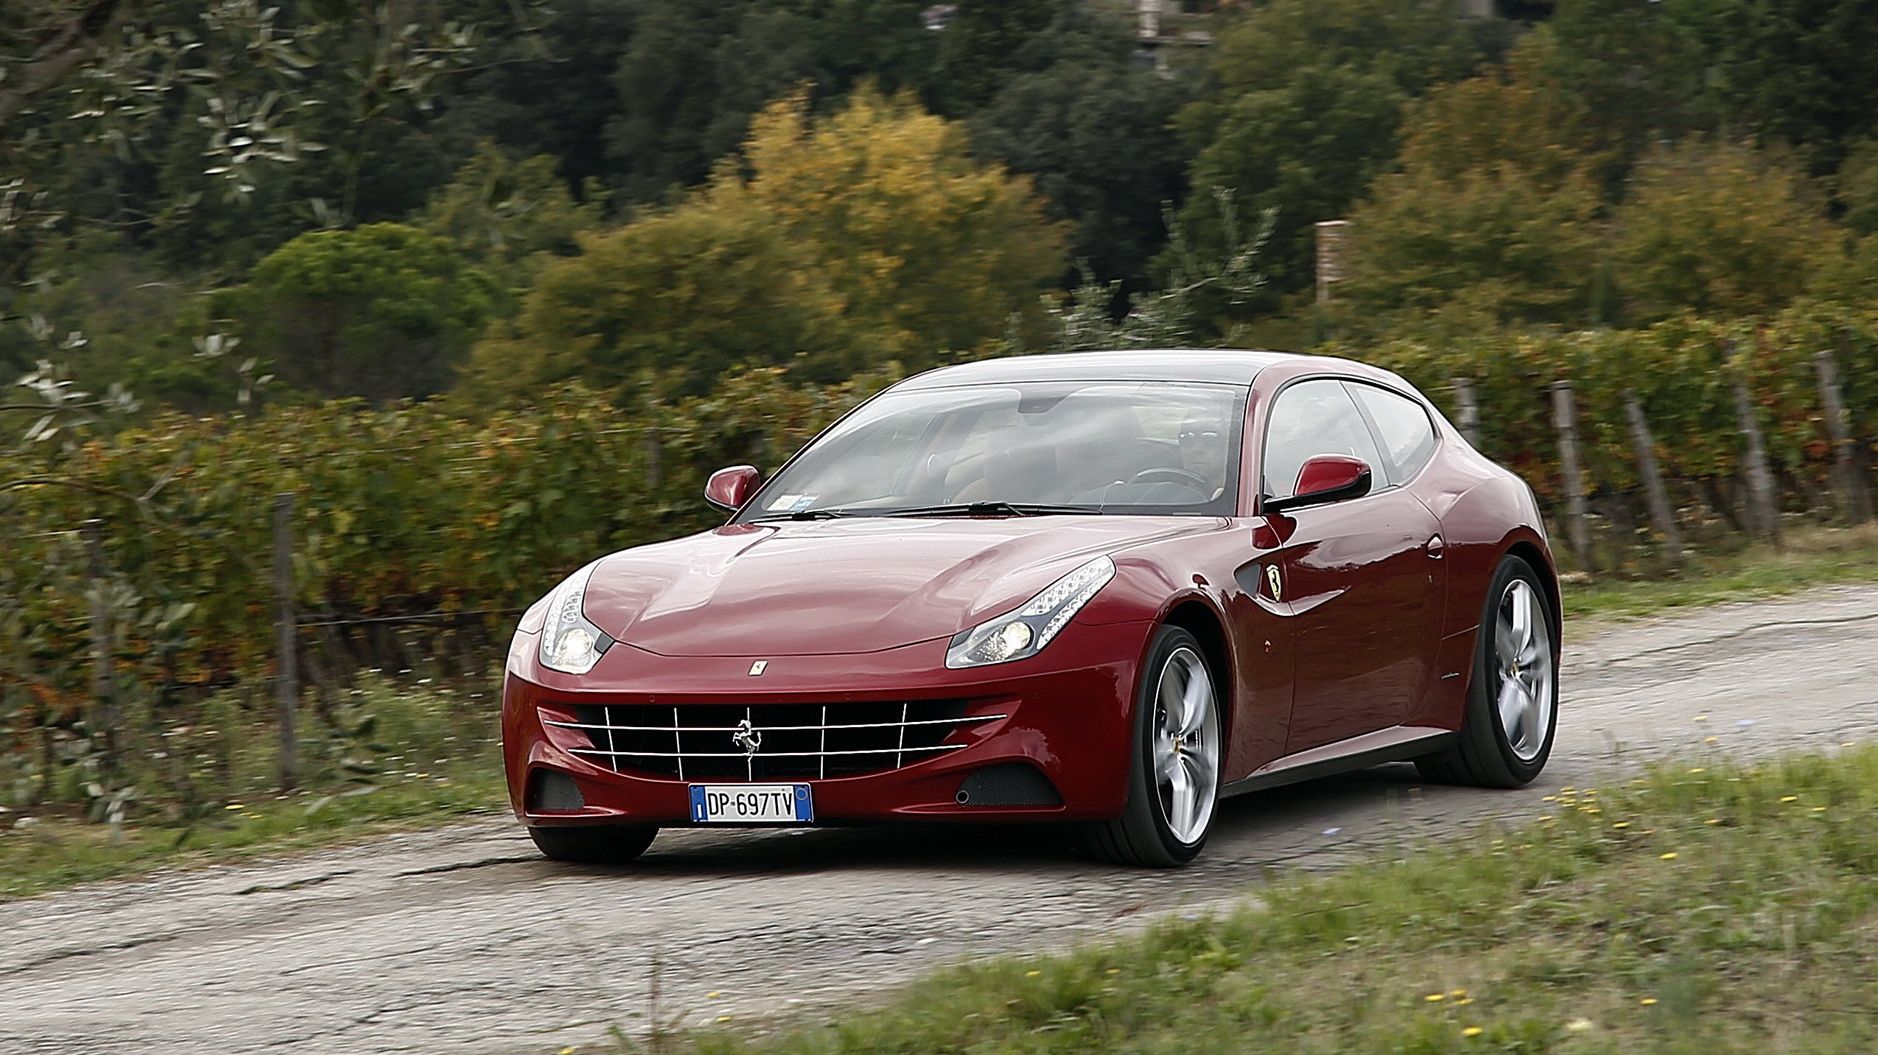  Ferrari's Tailor Made program got its hands on the FF, and the results are subtle but stunning. 